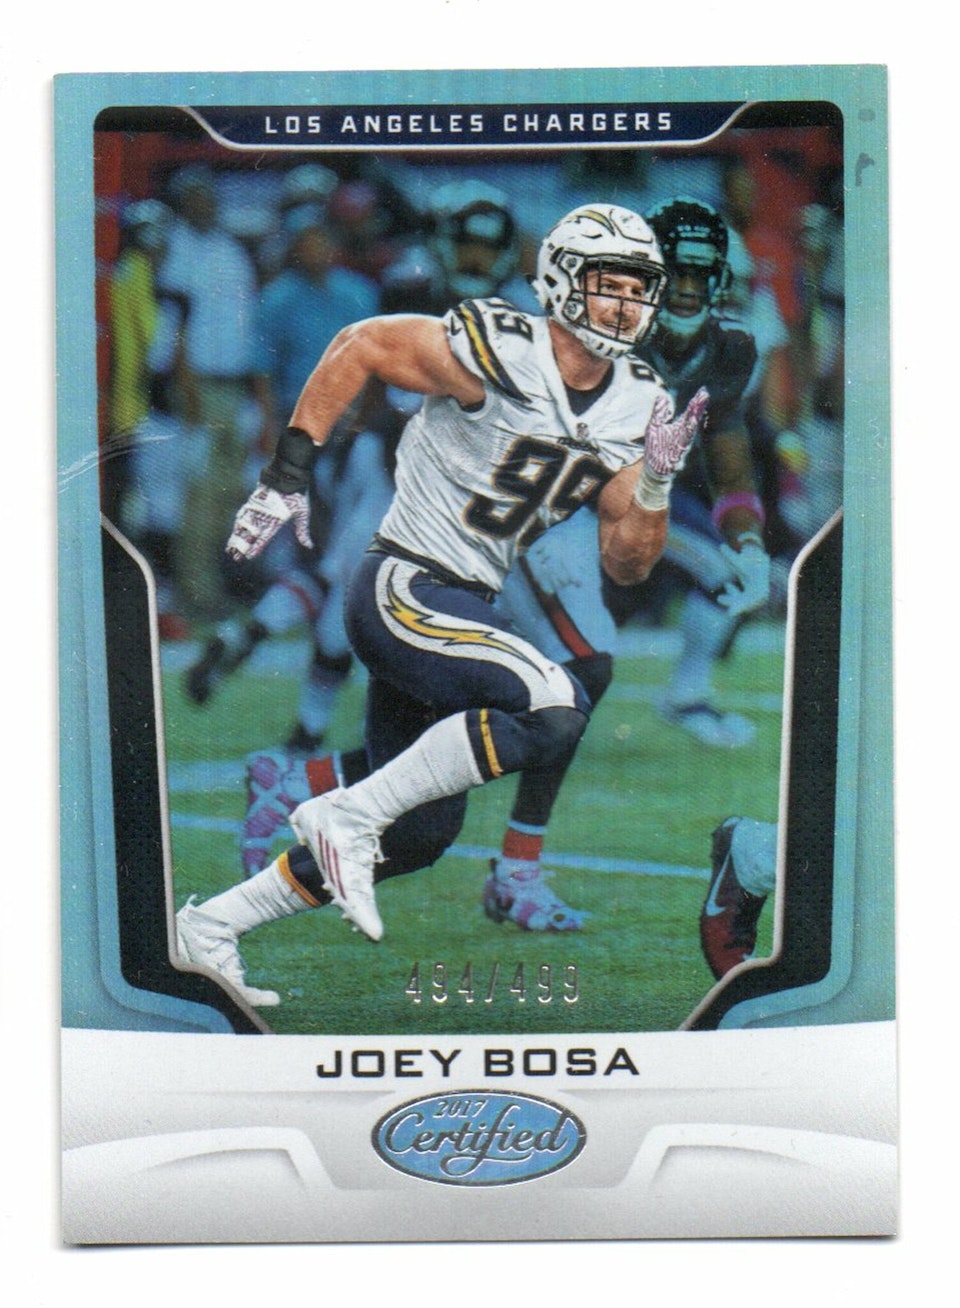 2017 Certified Mirror Silver #35 Joey Bosa (20-295x4-NFLCHARGERS)